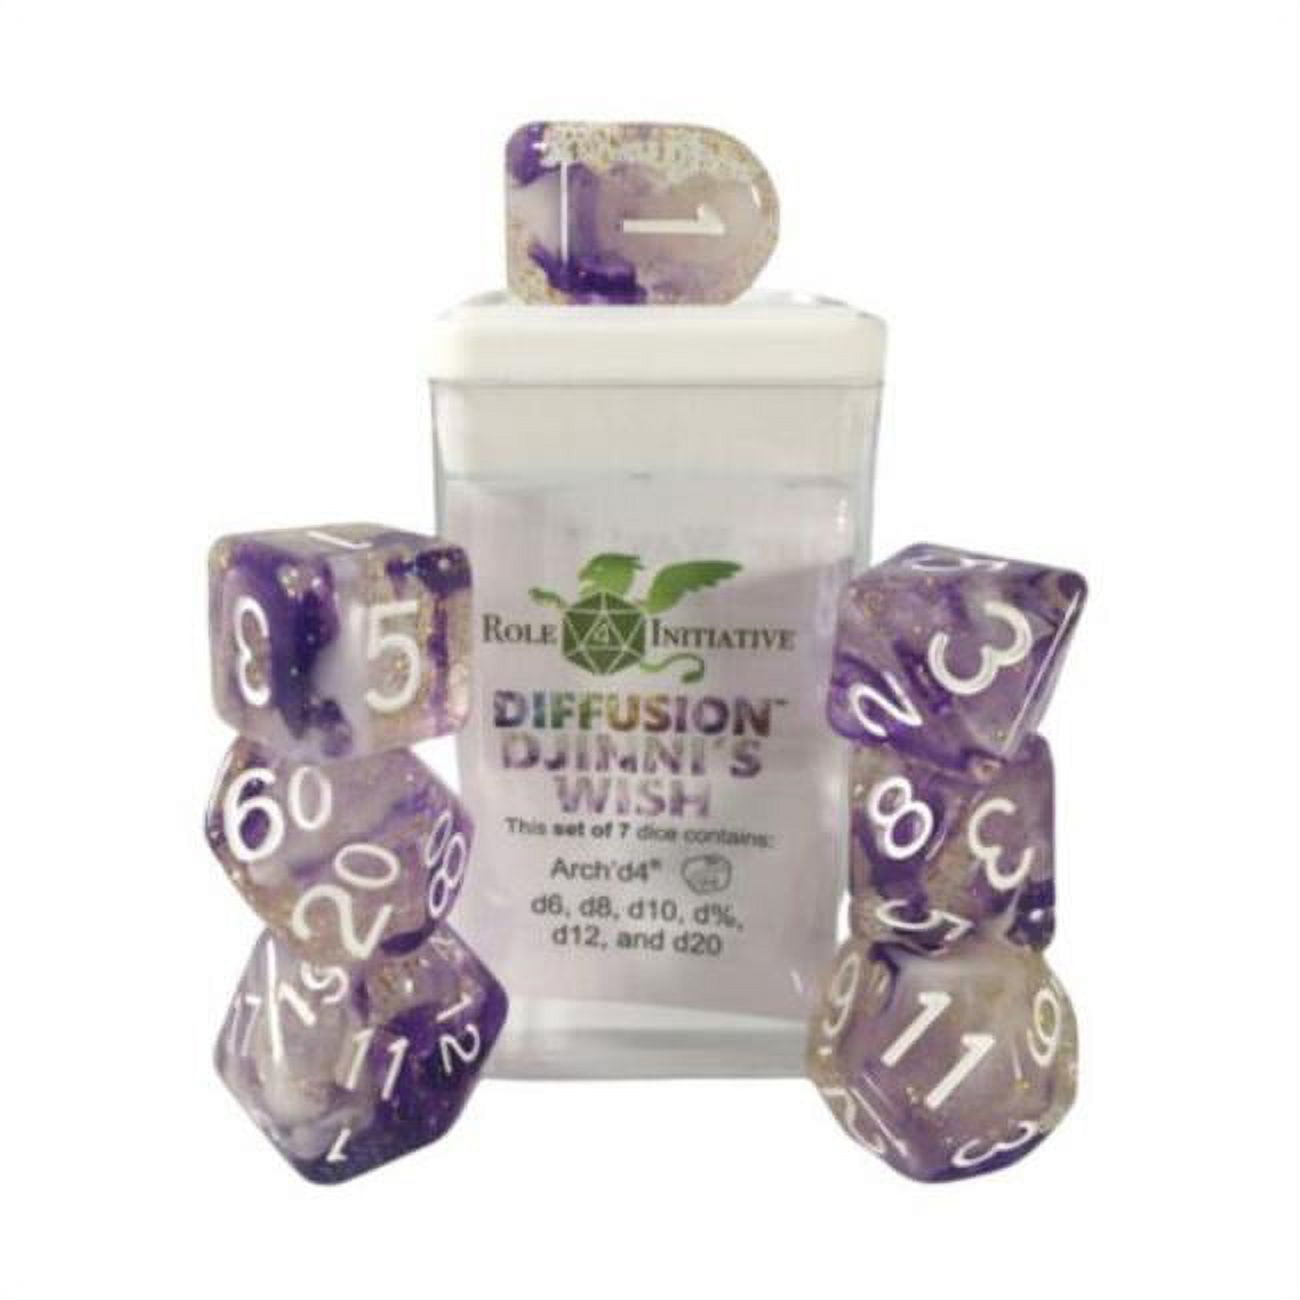 Picture of Role 4 Initiative R4I50534-7C-S Diffusion Djinnis Wish SPR Dice, Set of 7